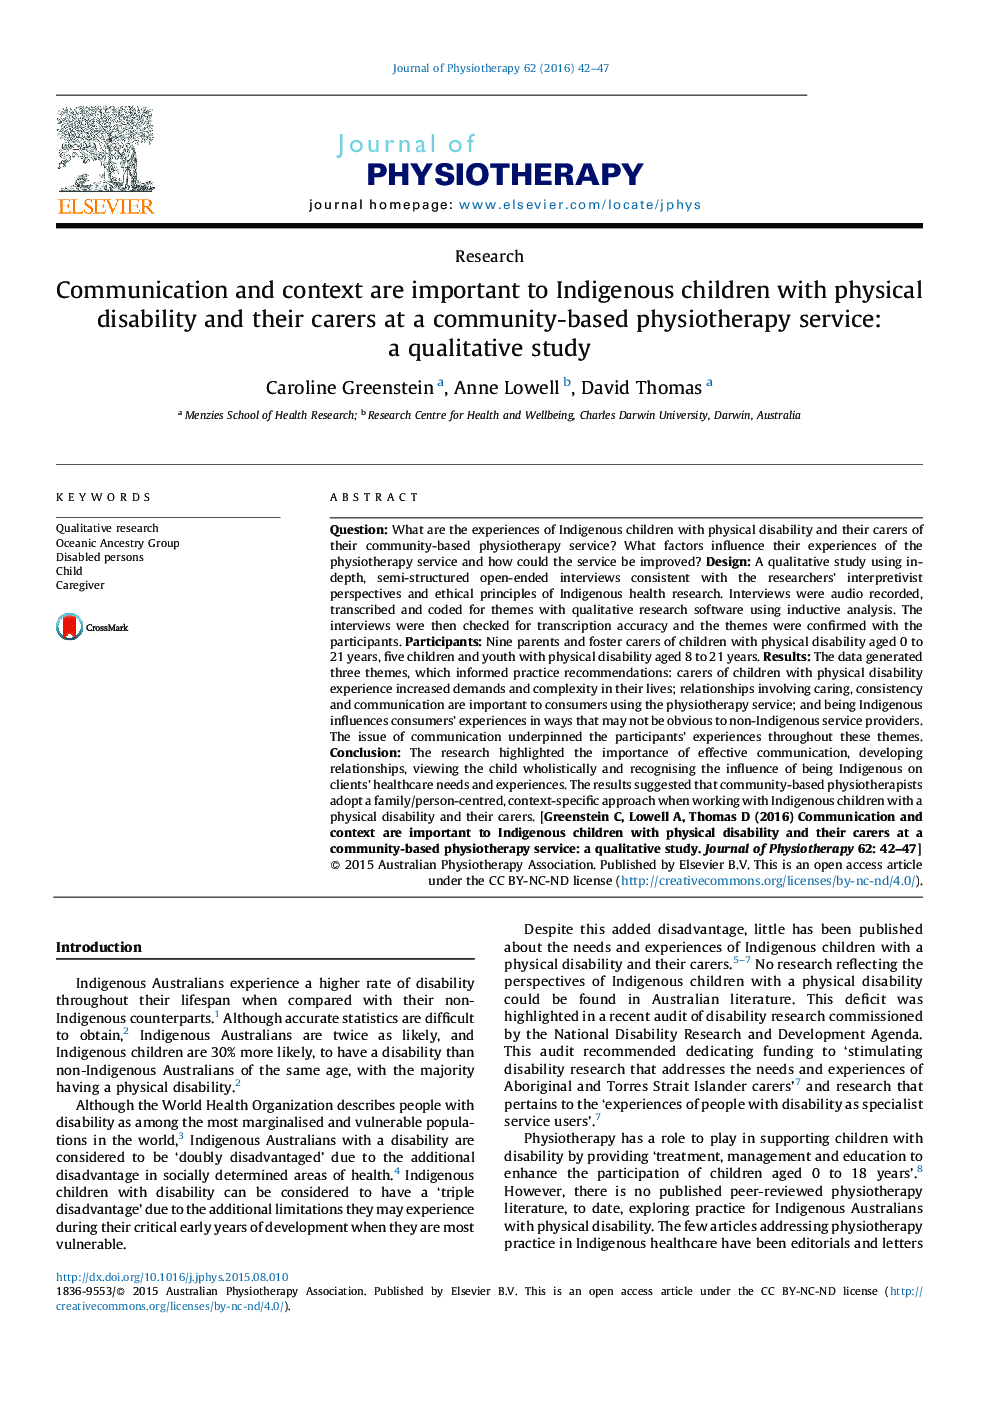 Communication and context are important to Indigenous children with physical disability and their carers at a community-based physiotherapy service: a qualitative study